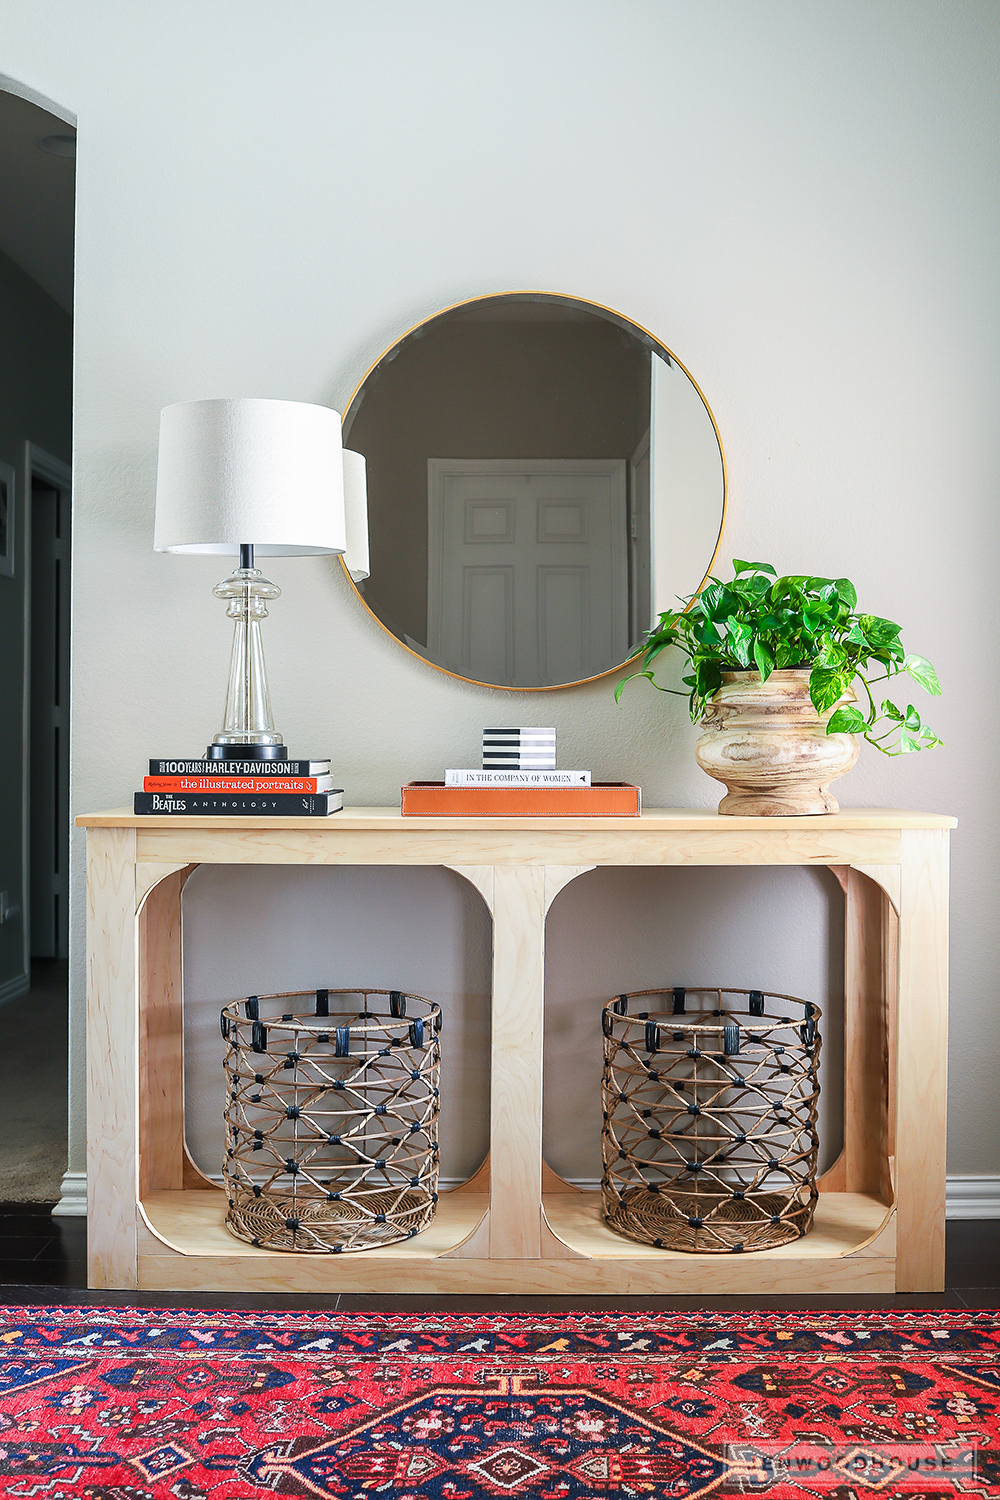 DIY modern one sheet plywood console table (via jenwoodhouse.com)